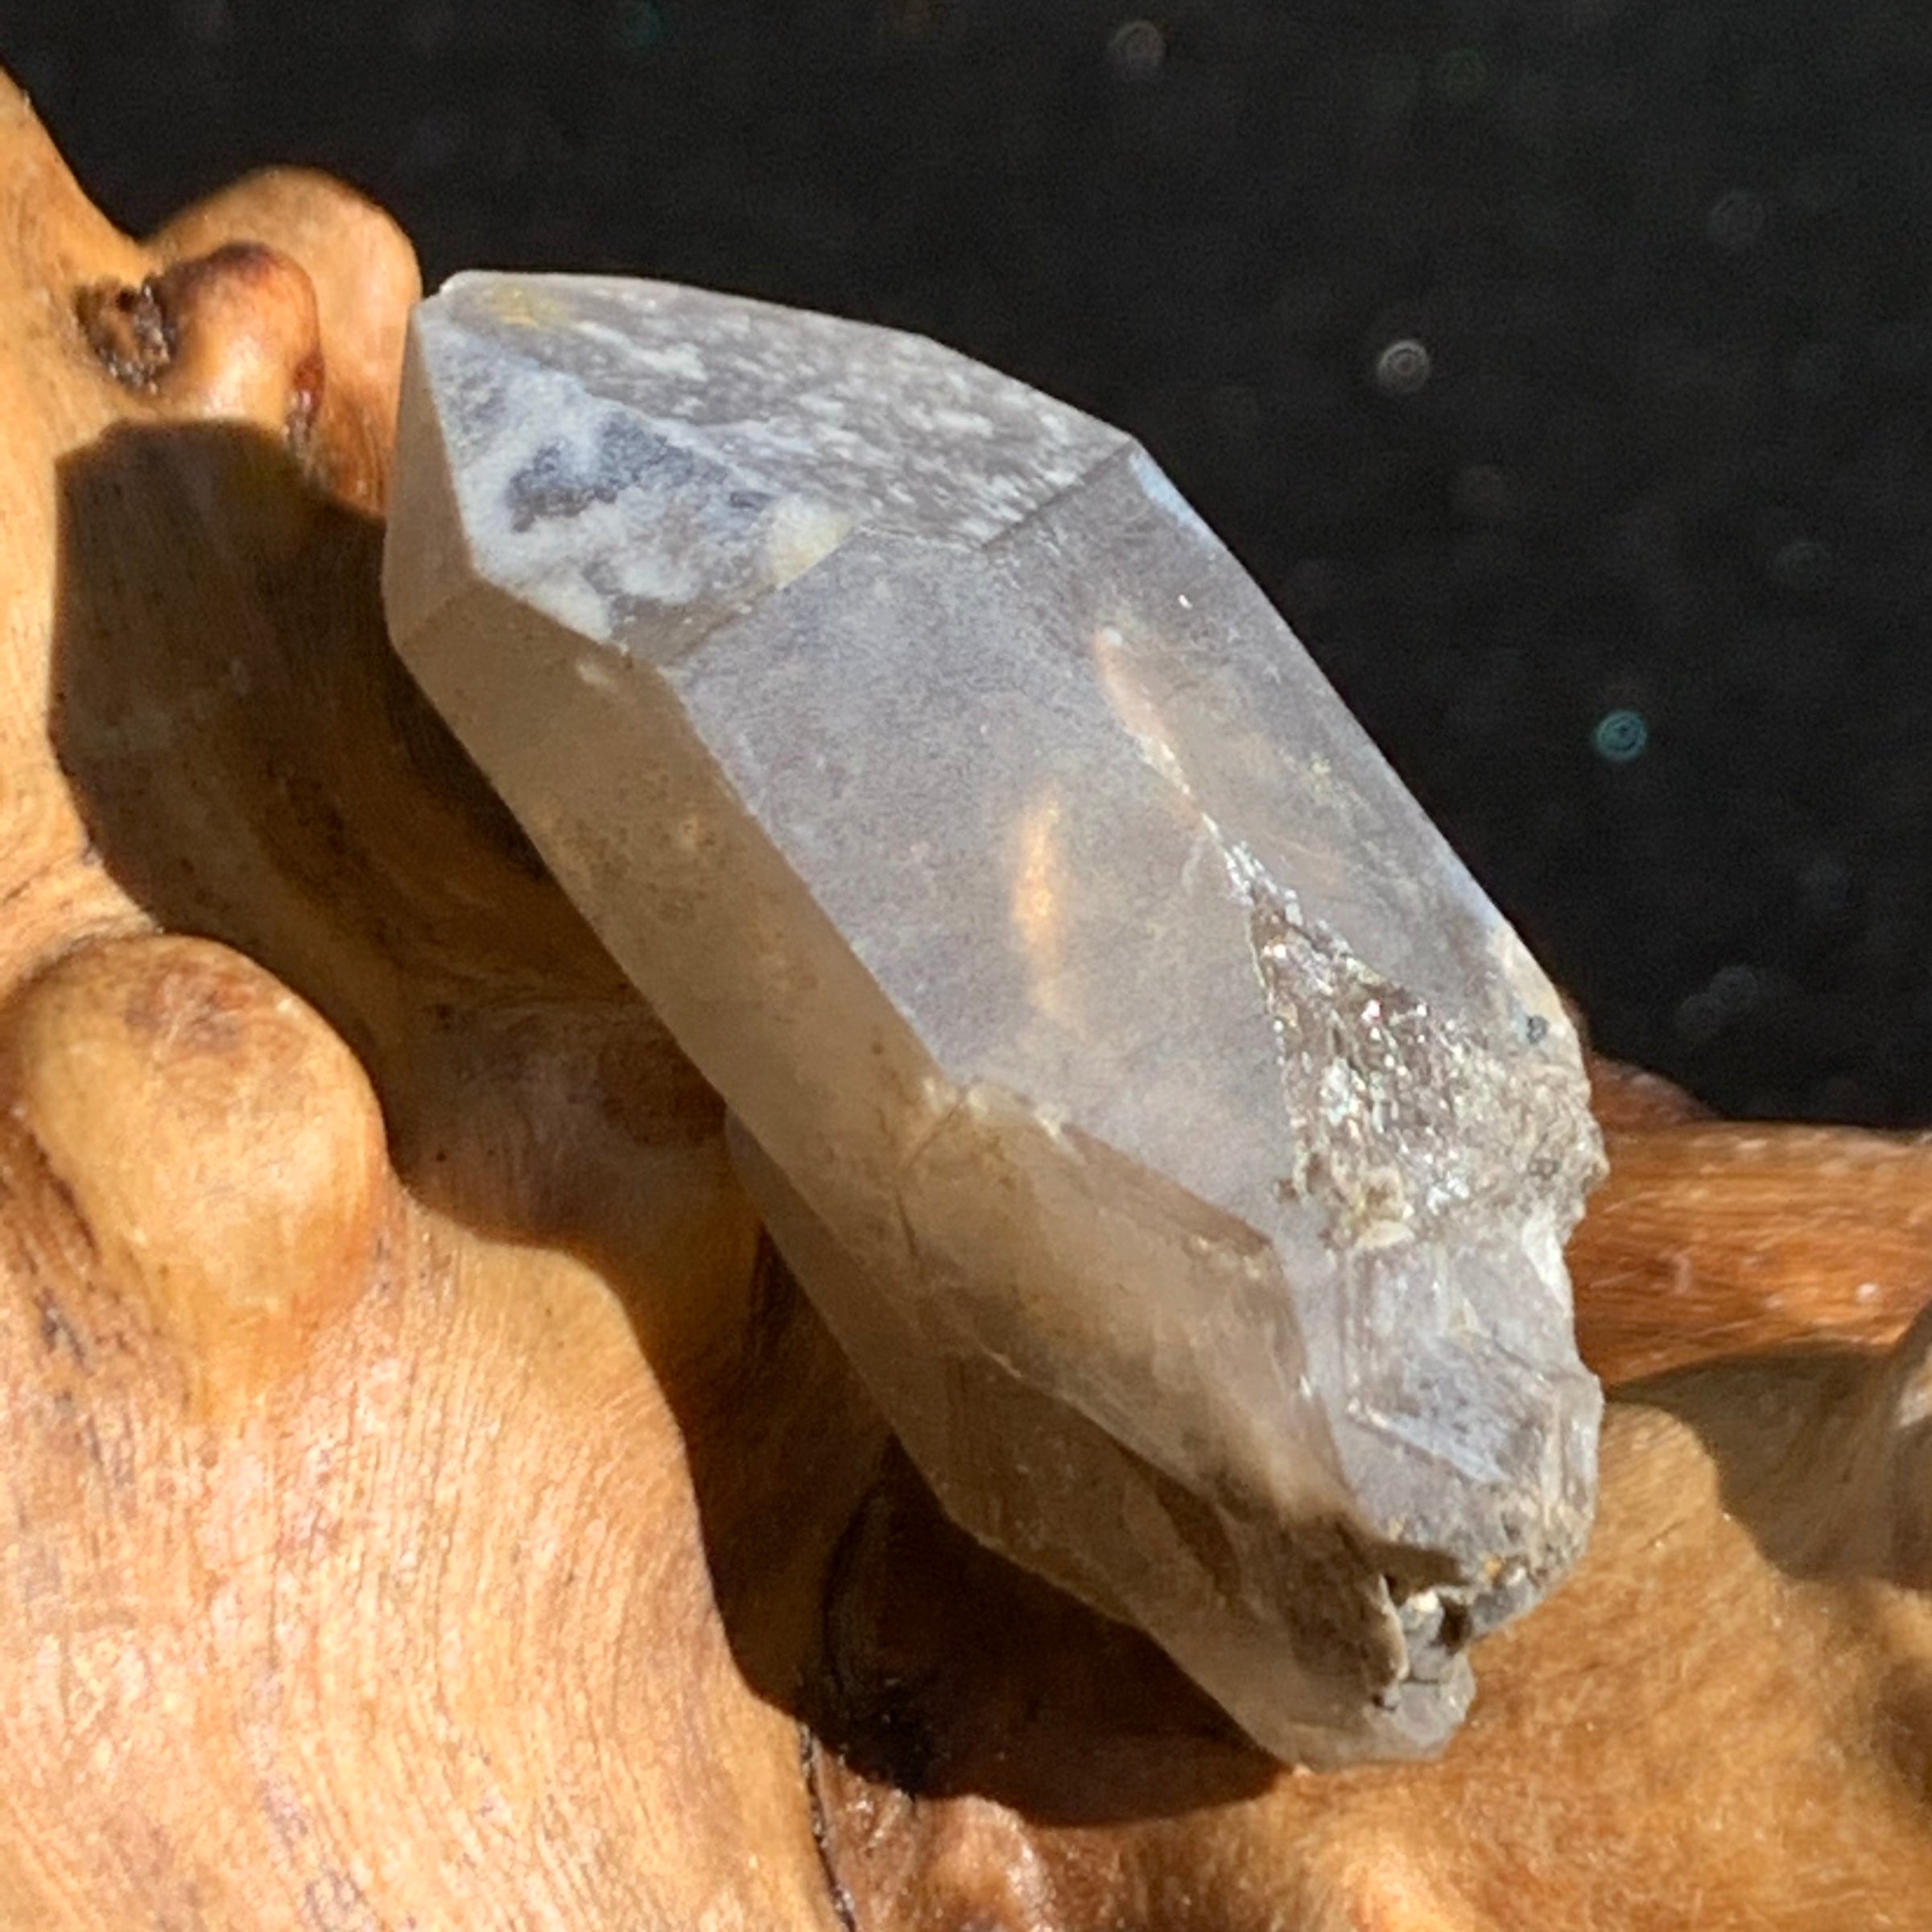 tiny brookite crystals on a terminated smokey quartz crystal sitting on driftwood for display